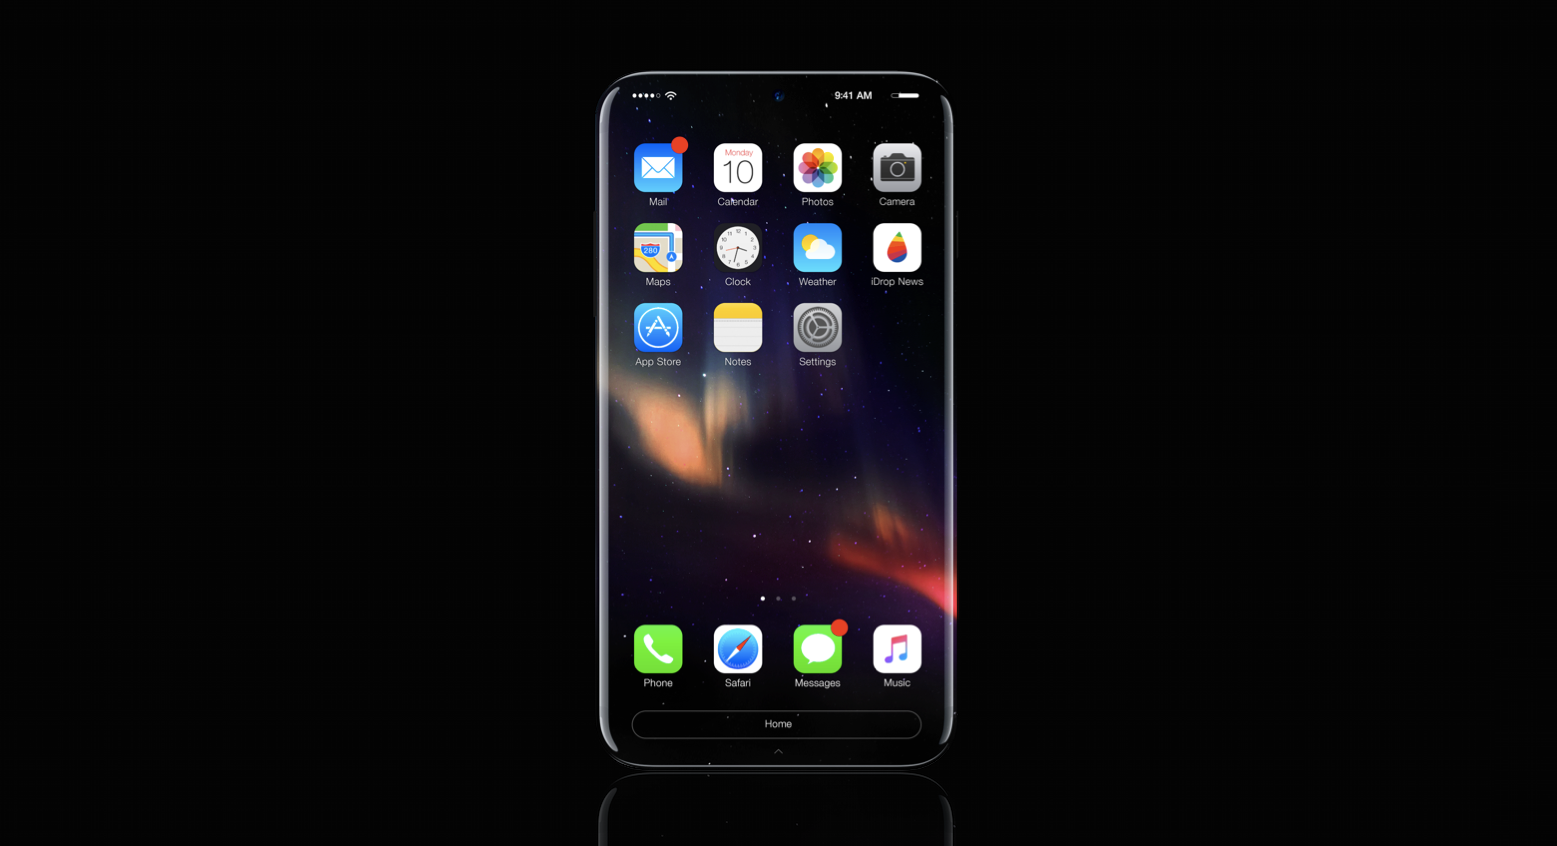 iPhone 8 Rumors: Everything We Know About the Next iPhone | iPhoneLife.com